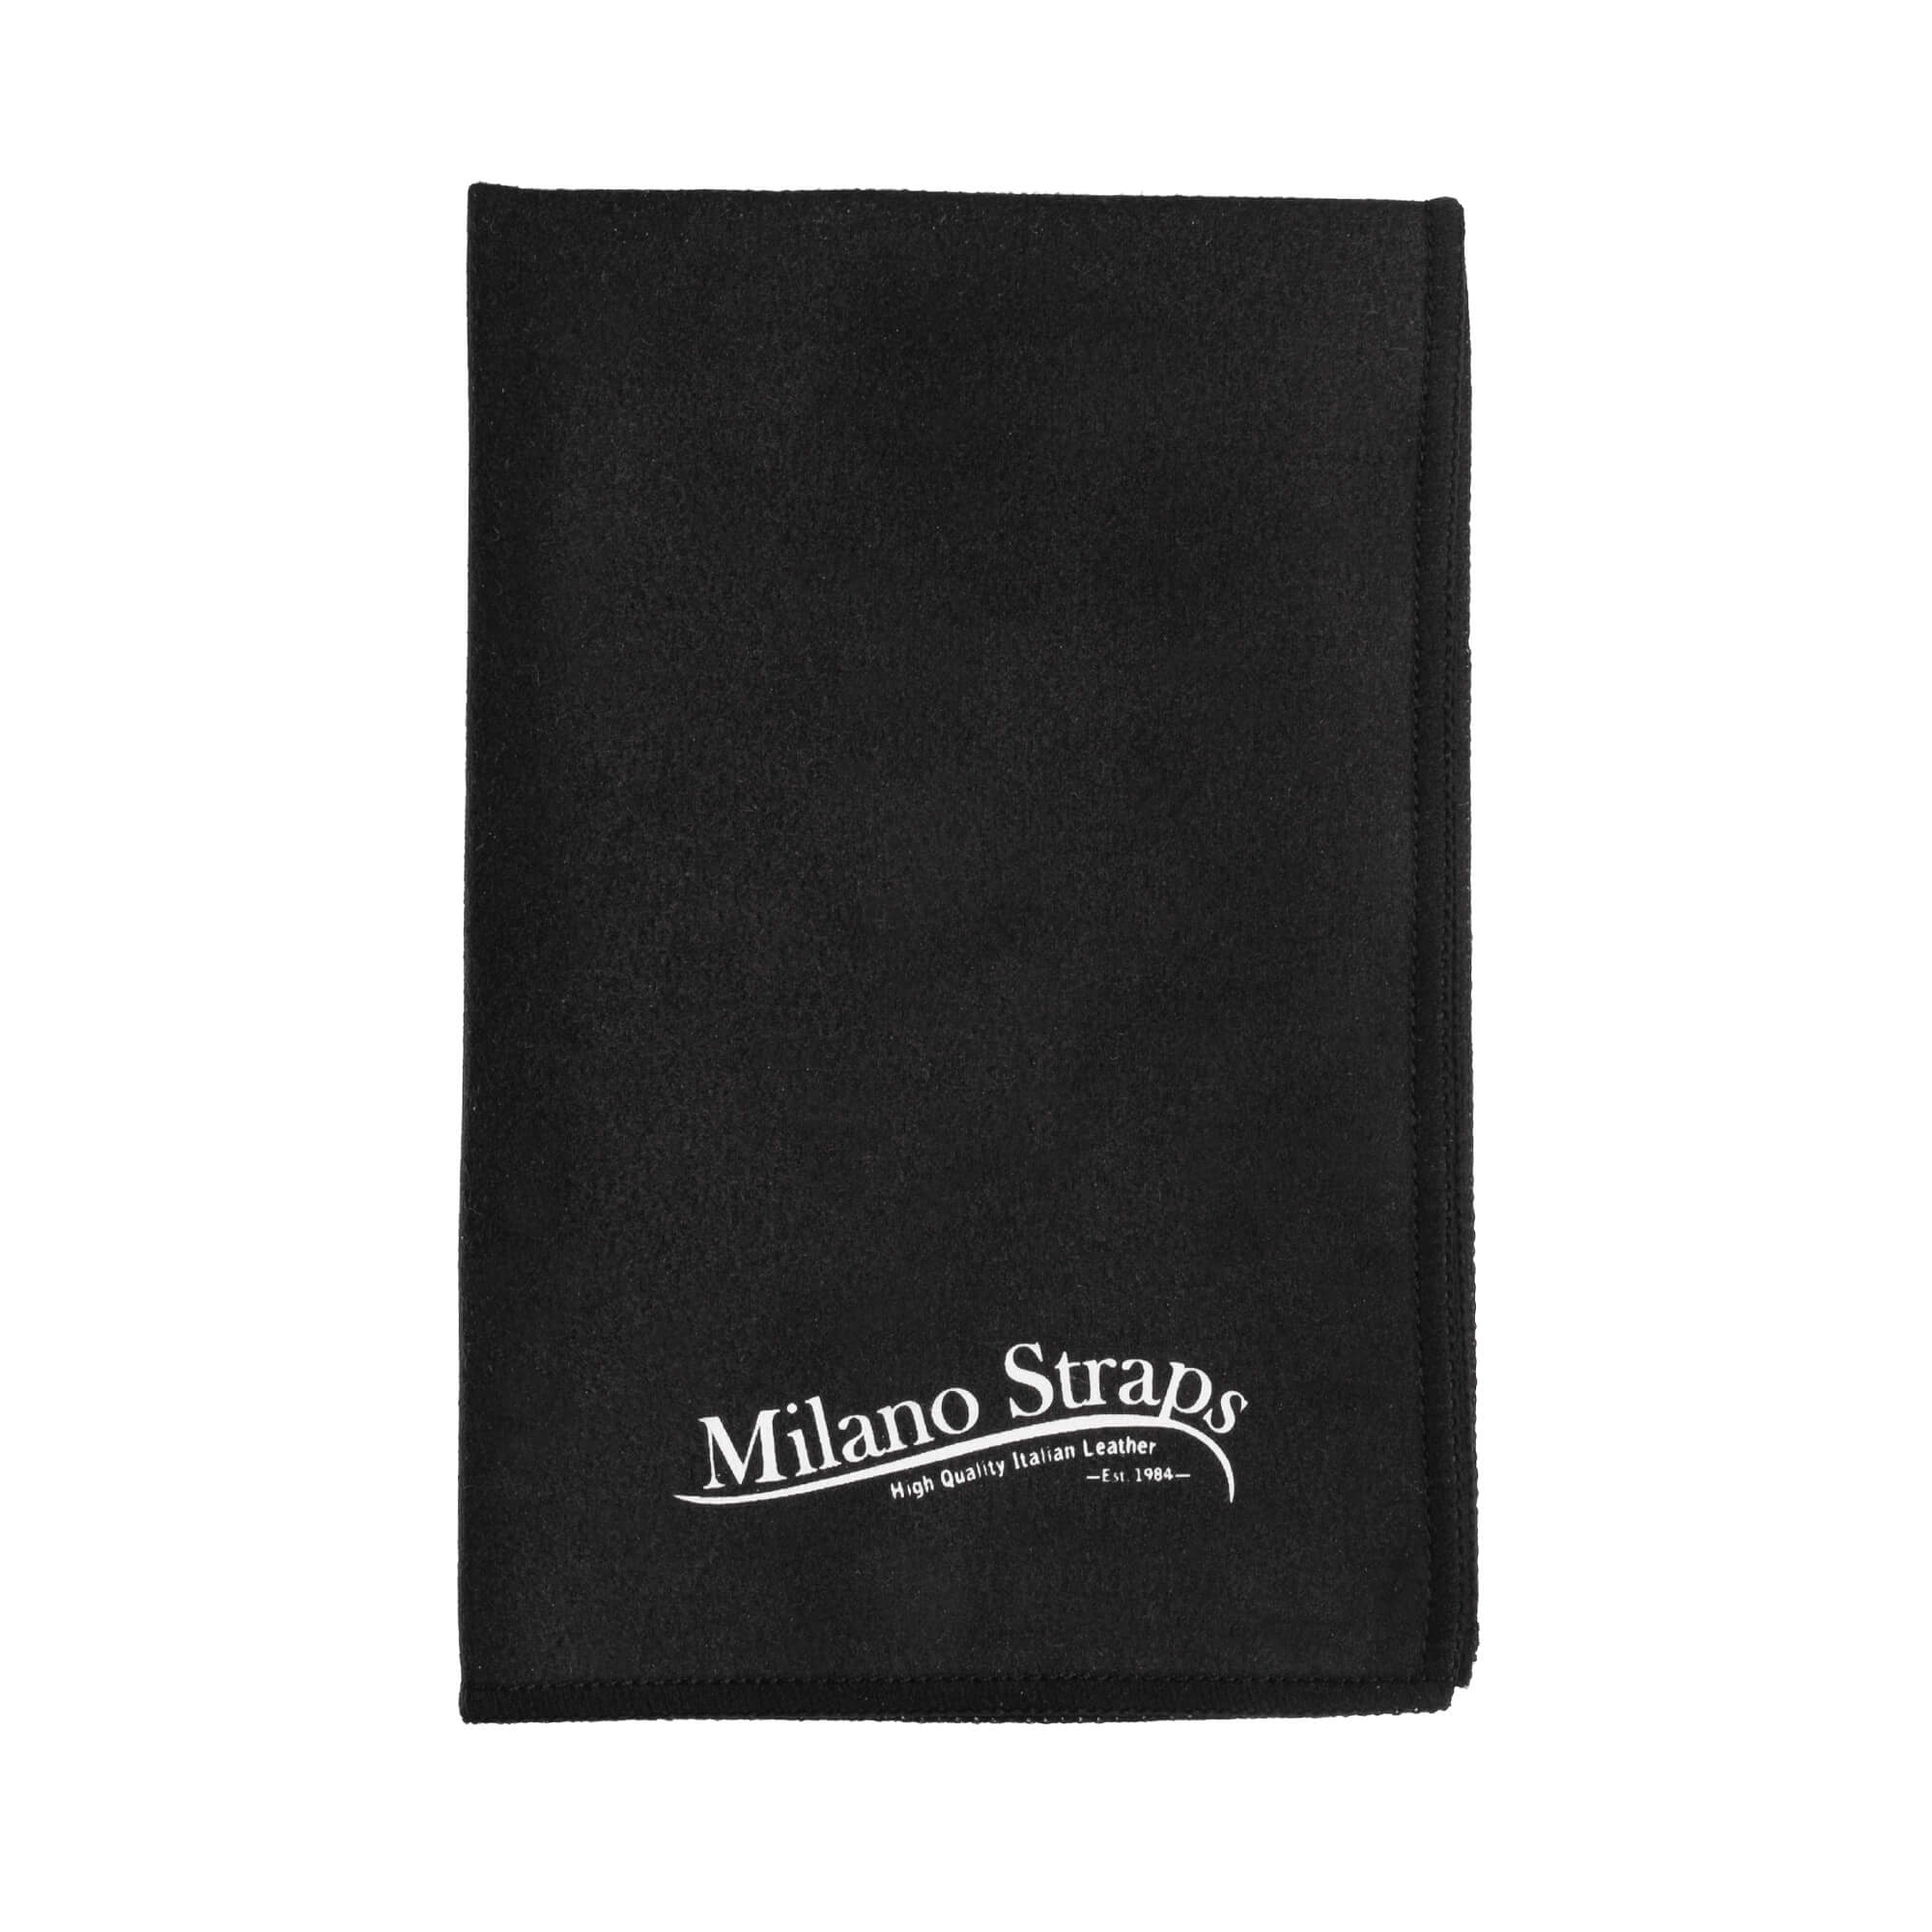 Microfiber watch cleaning cloth - Milano Straps